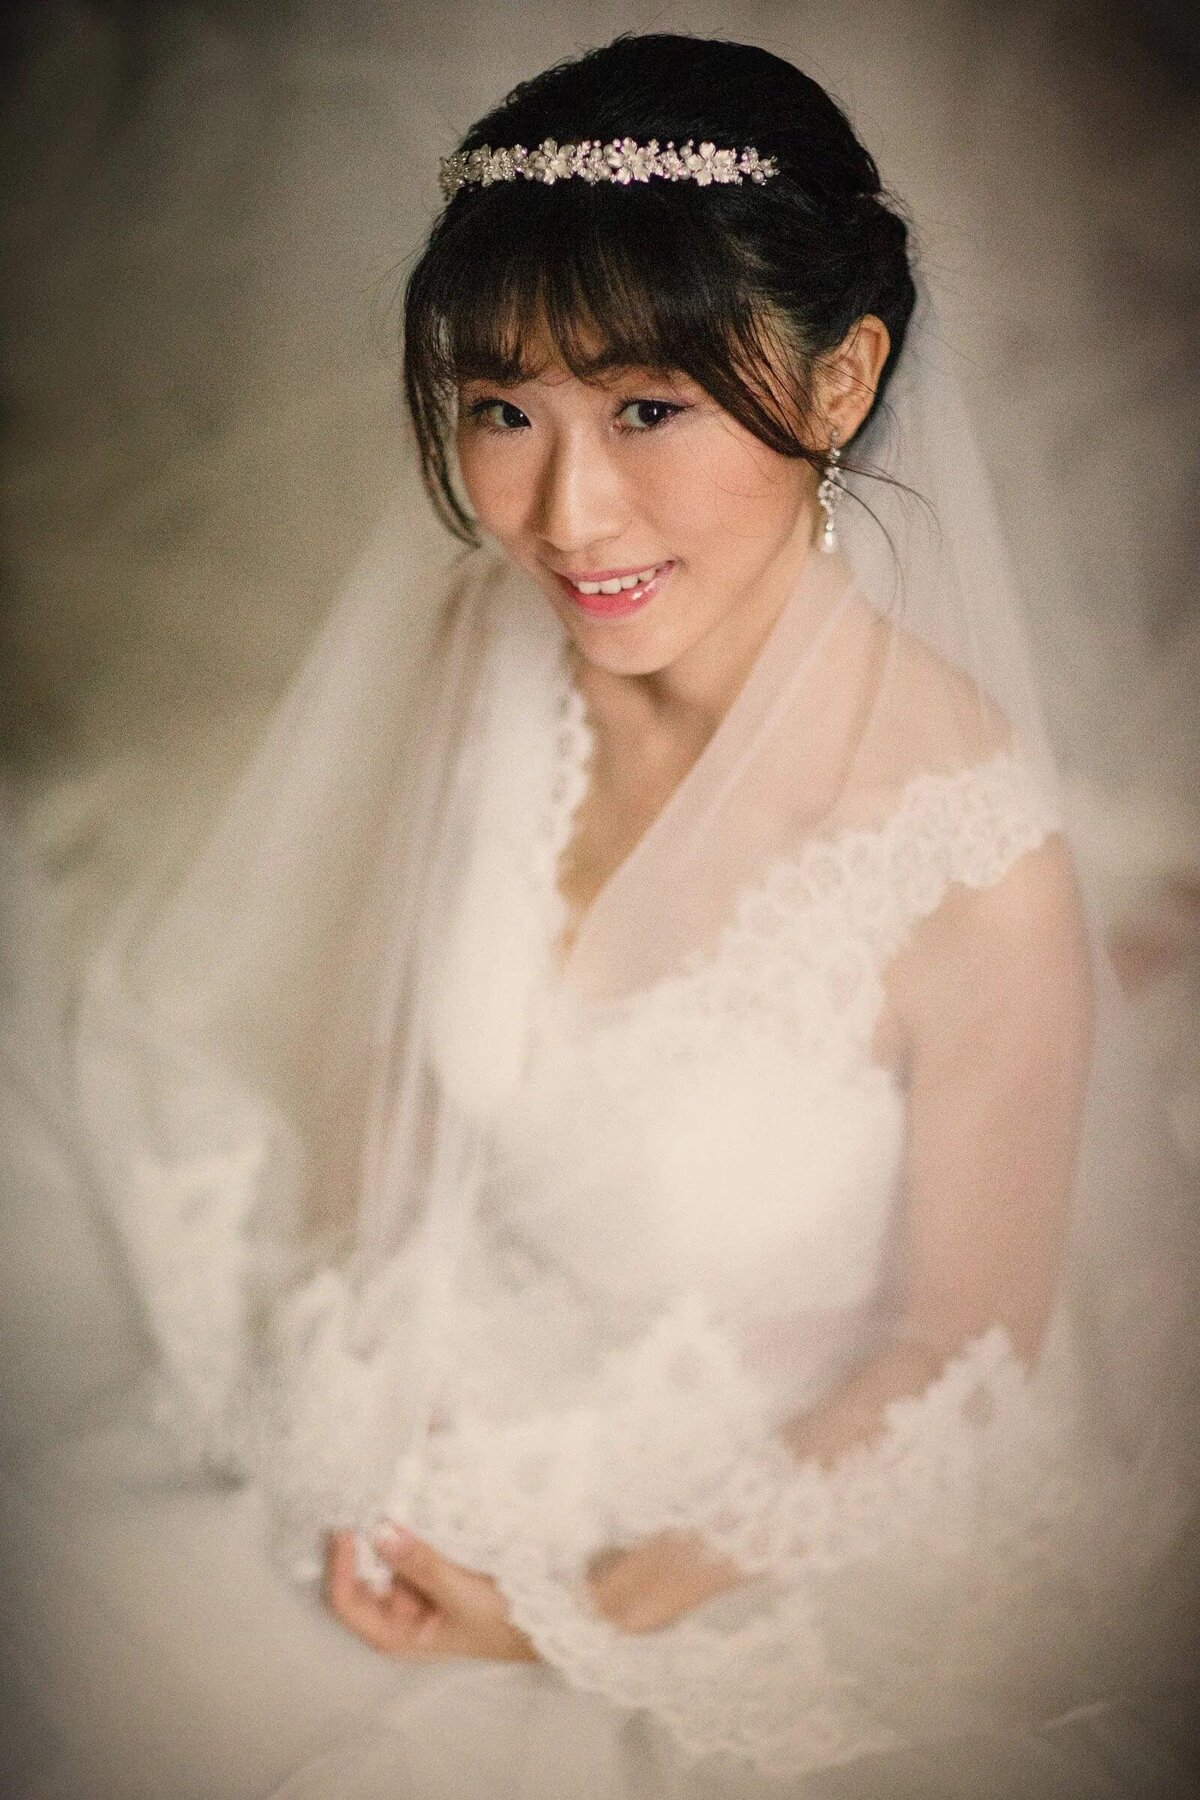 A bride sitting down smiling with her hands in her lap